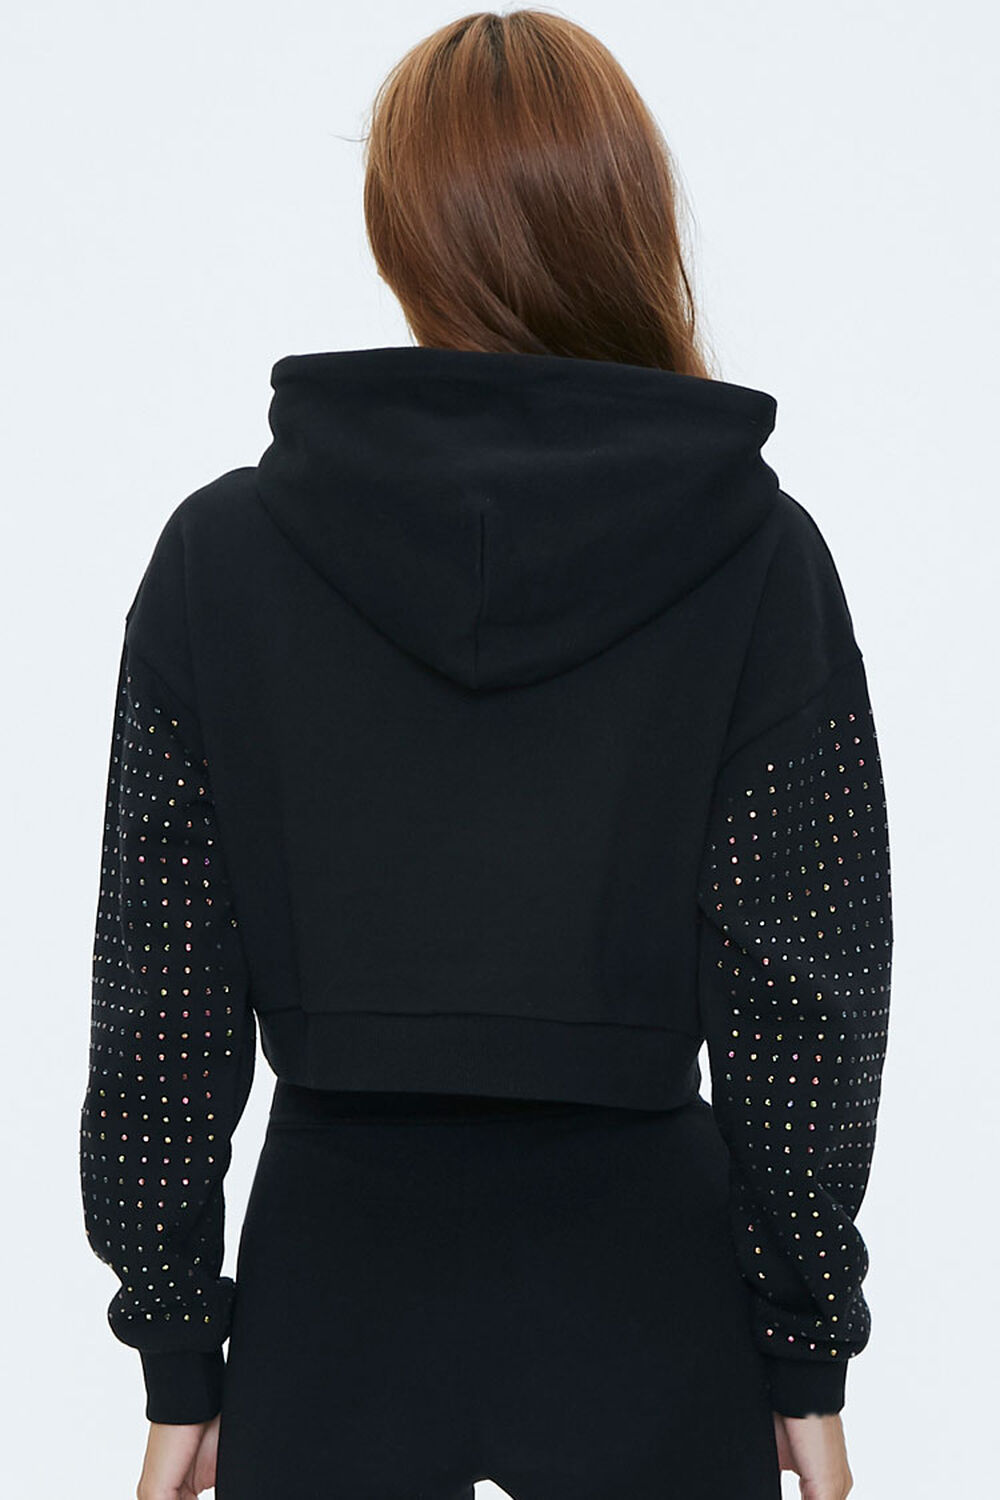 BLACK/SILVER Dropped Studded-Sleeve Hoodie, image 3